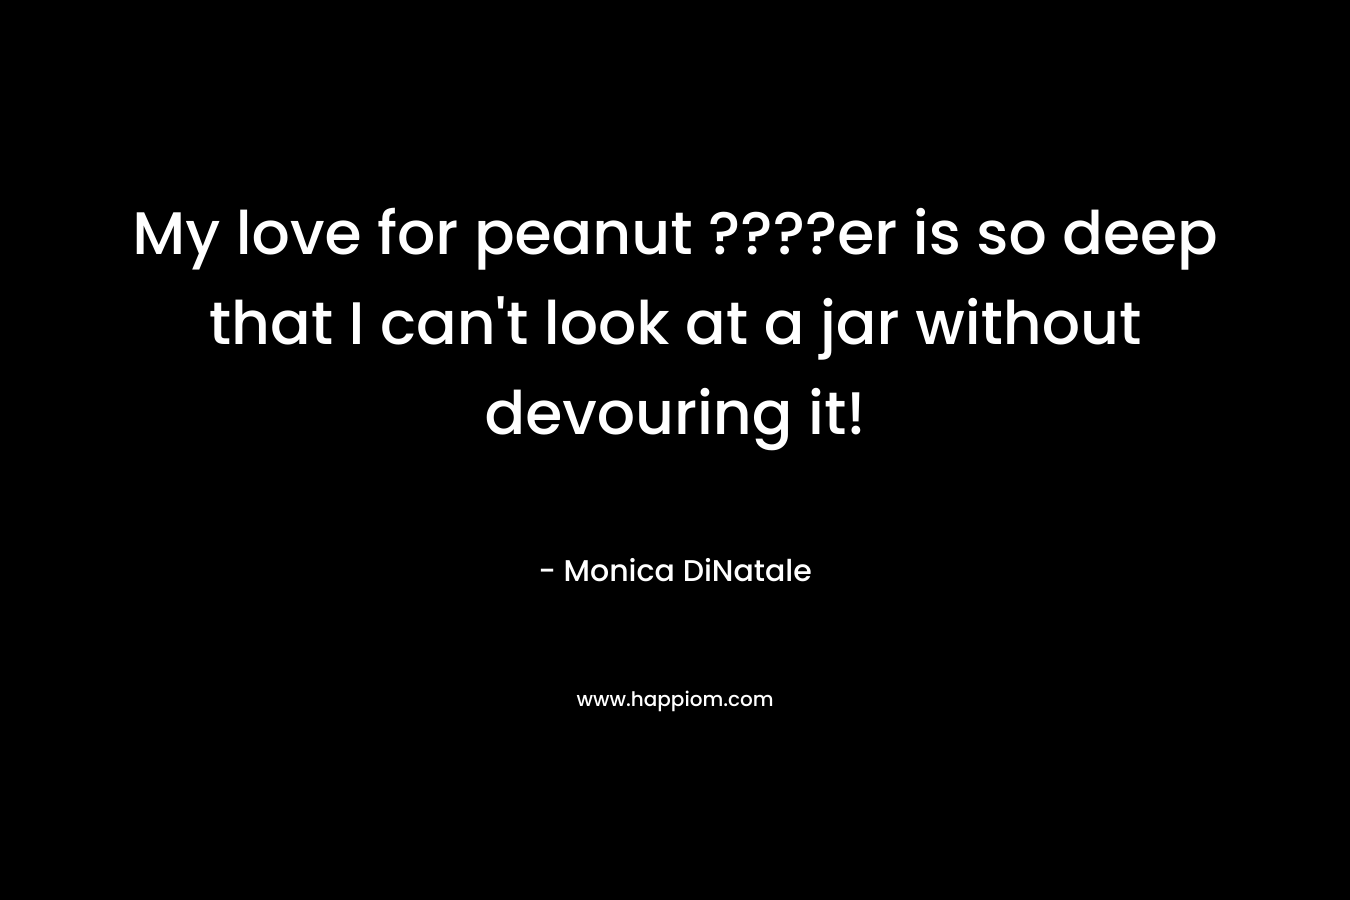 My love for peanut ????er is so deep that I can’t look at a jar without devouring it! – Monica DiNatale